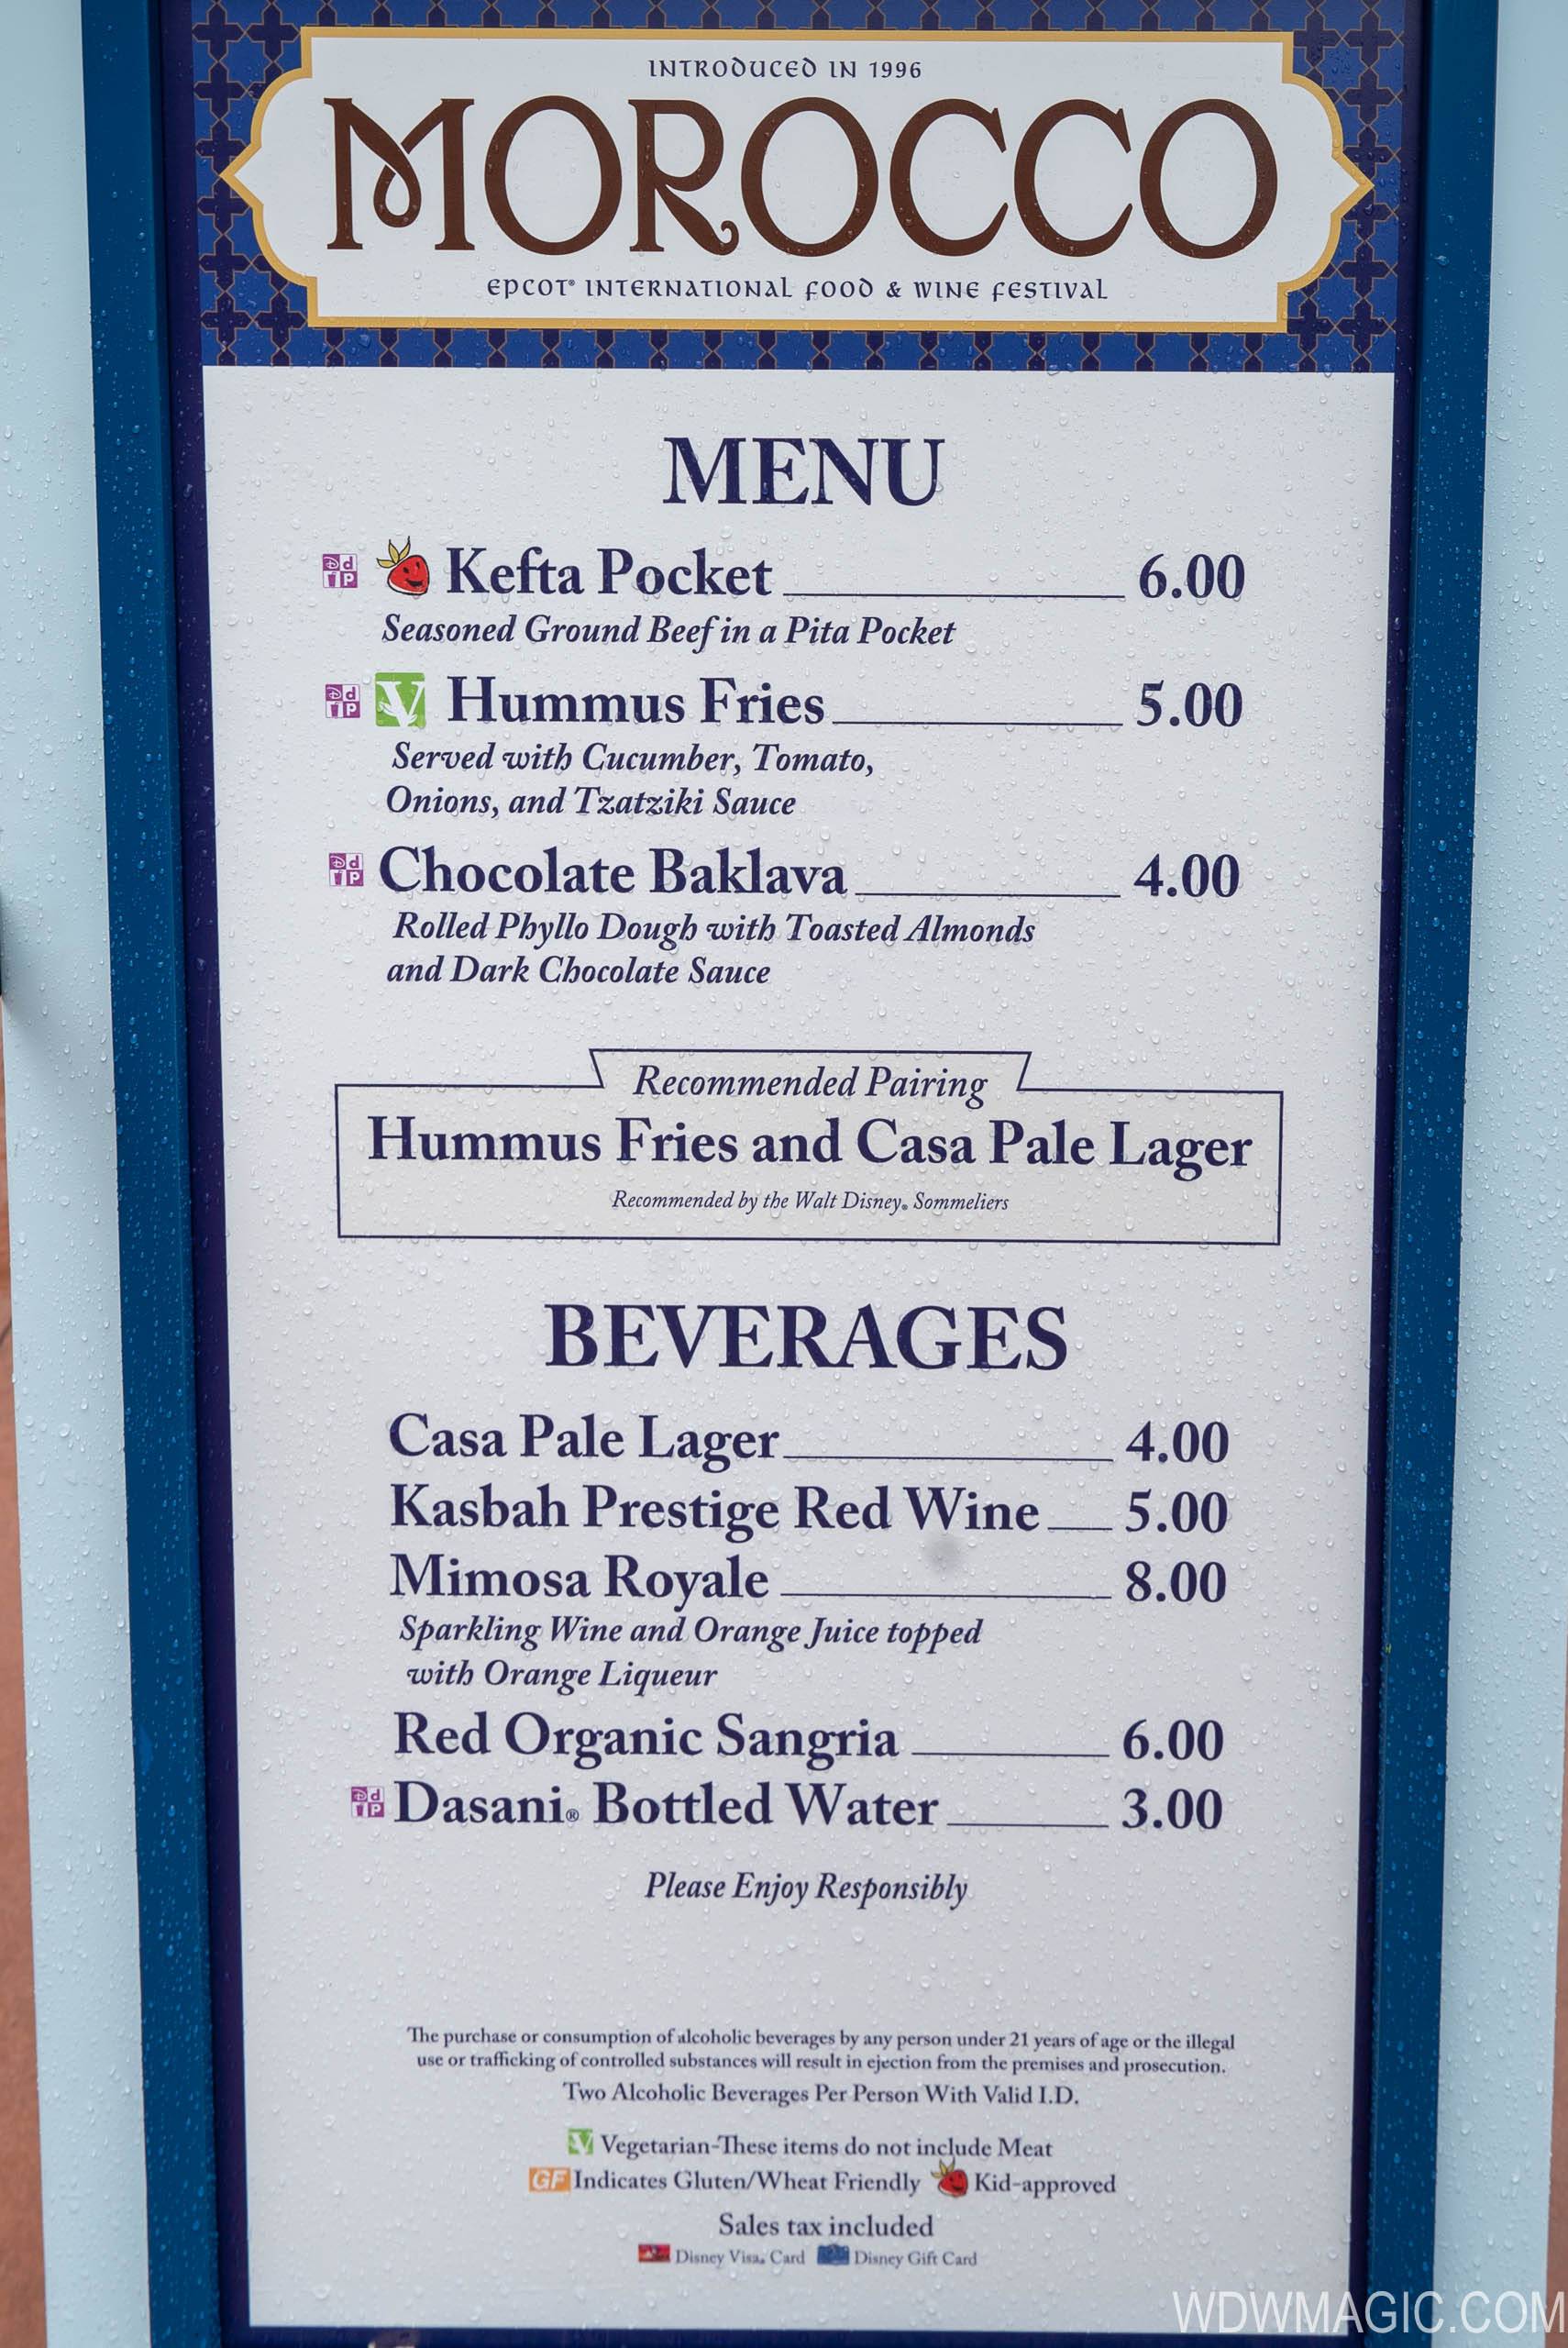 PHOTOS - Photo tour around all of the 2018 Epcot International Food and Wine Festival kiosks with menus and pricing